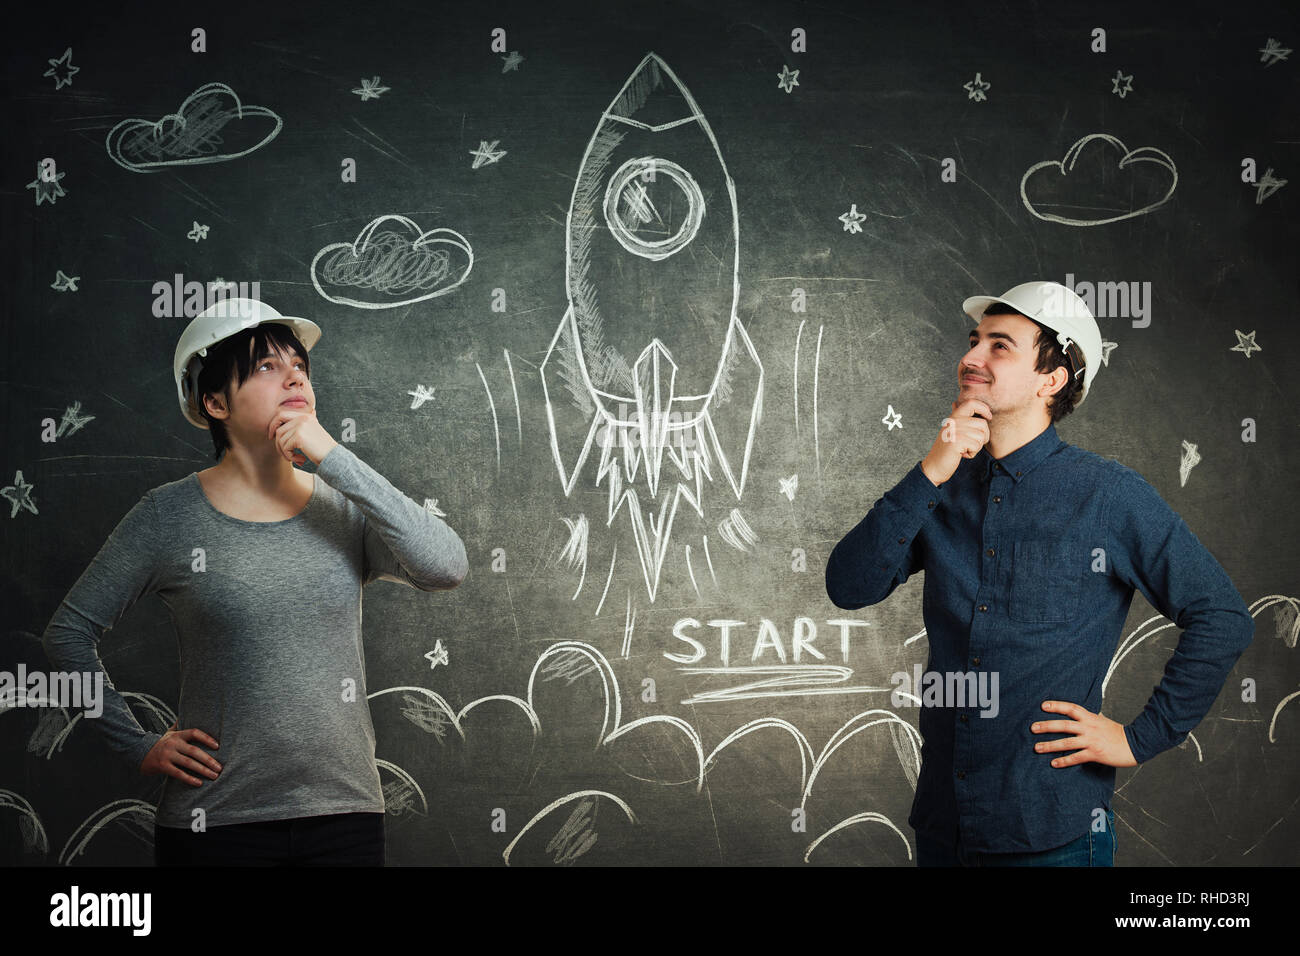 Engineers scientists man and woman sharing thoughts together for starting a rocket space ship in cosmos drawing sketch on blackboard. Idea exchange pa Stock Photo